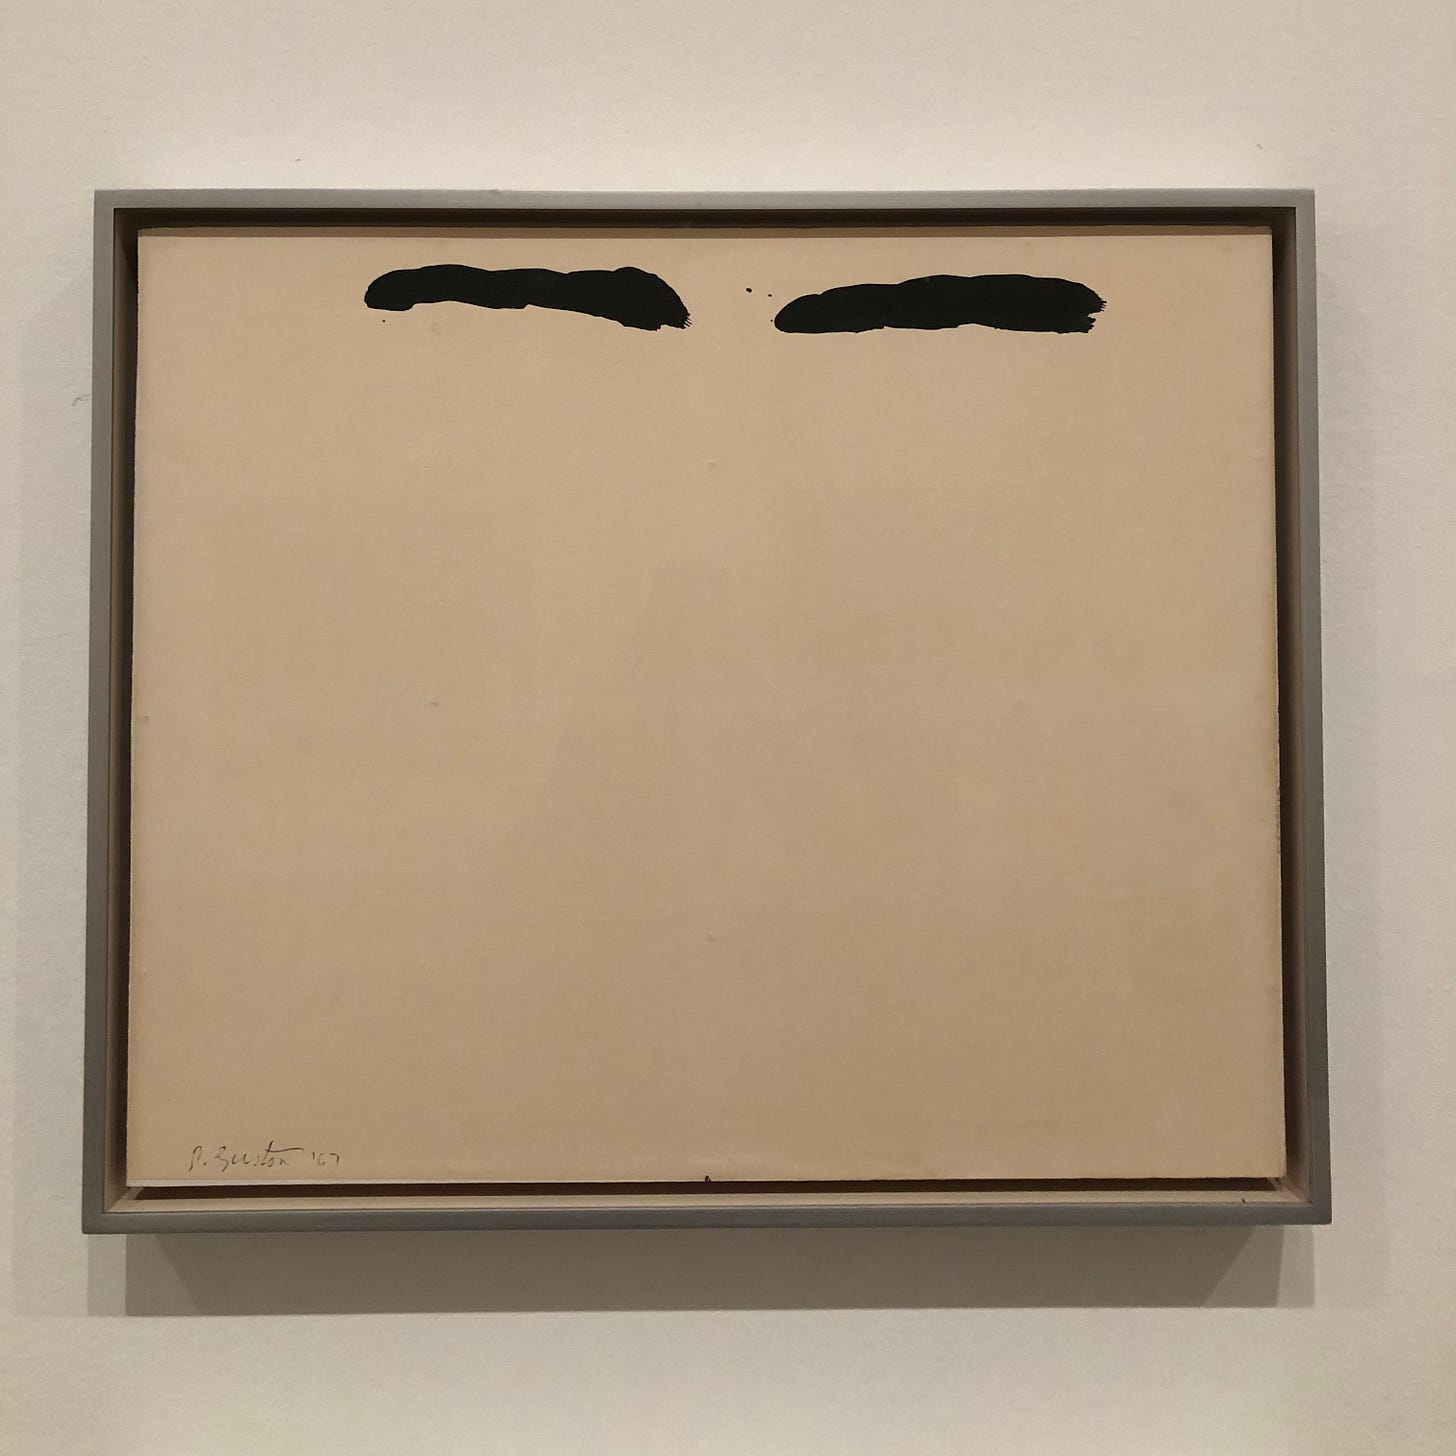 A blank canvas with two thick eyebrow-like brushstrokes at the top